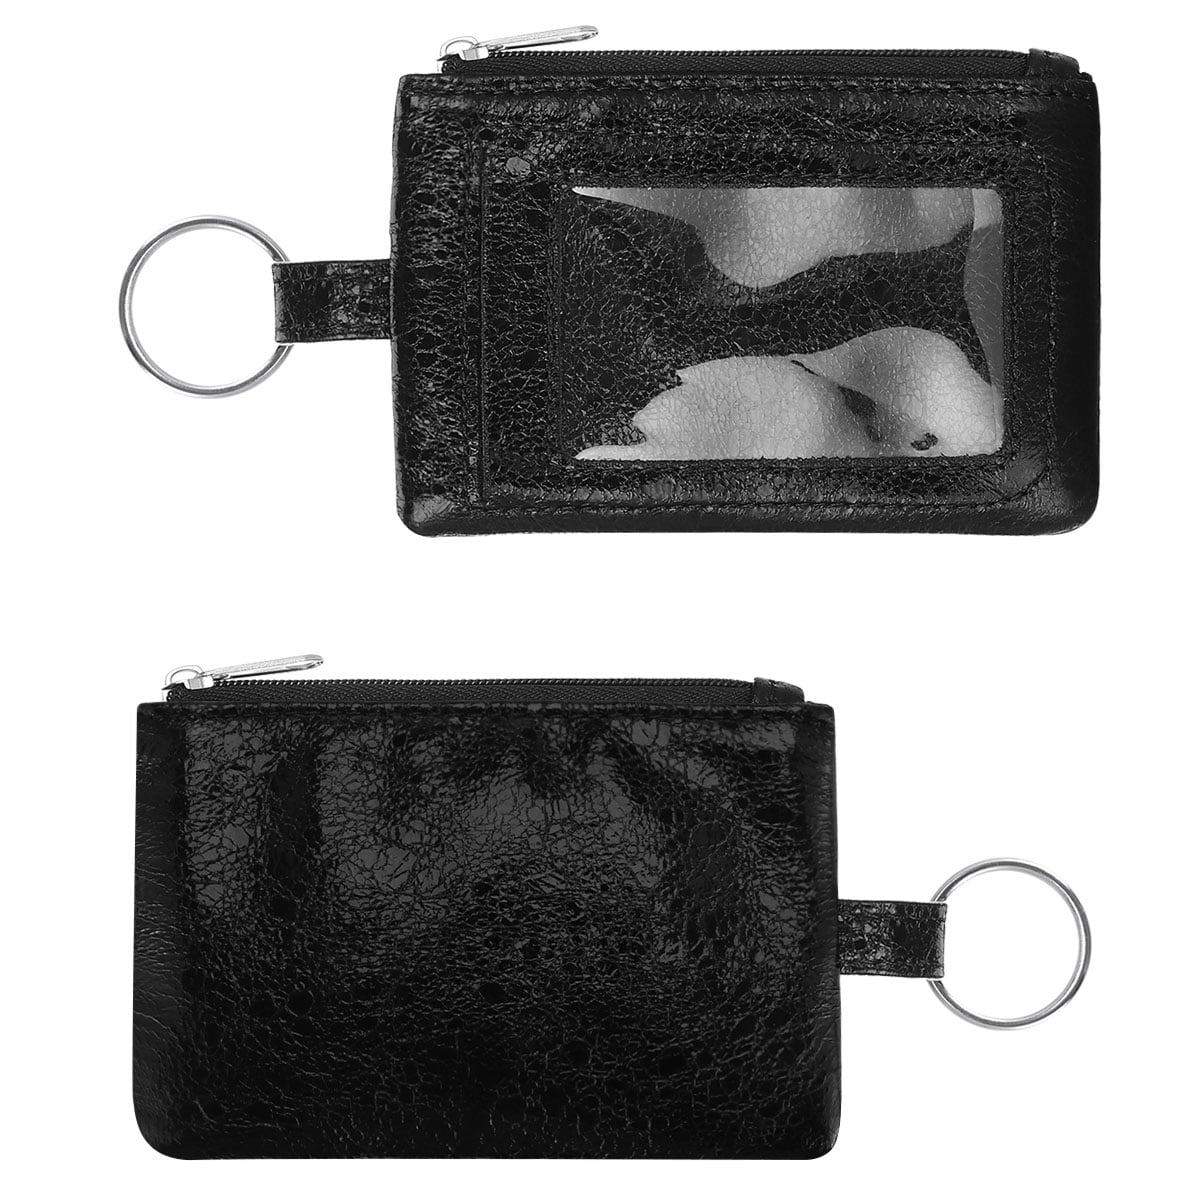 HAWEE Zip ID Case, Slim Coin Purse Wallet Change Pouch with Key Ring Mini  Change Wallet Keychain Purse 